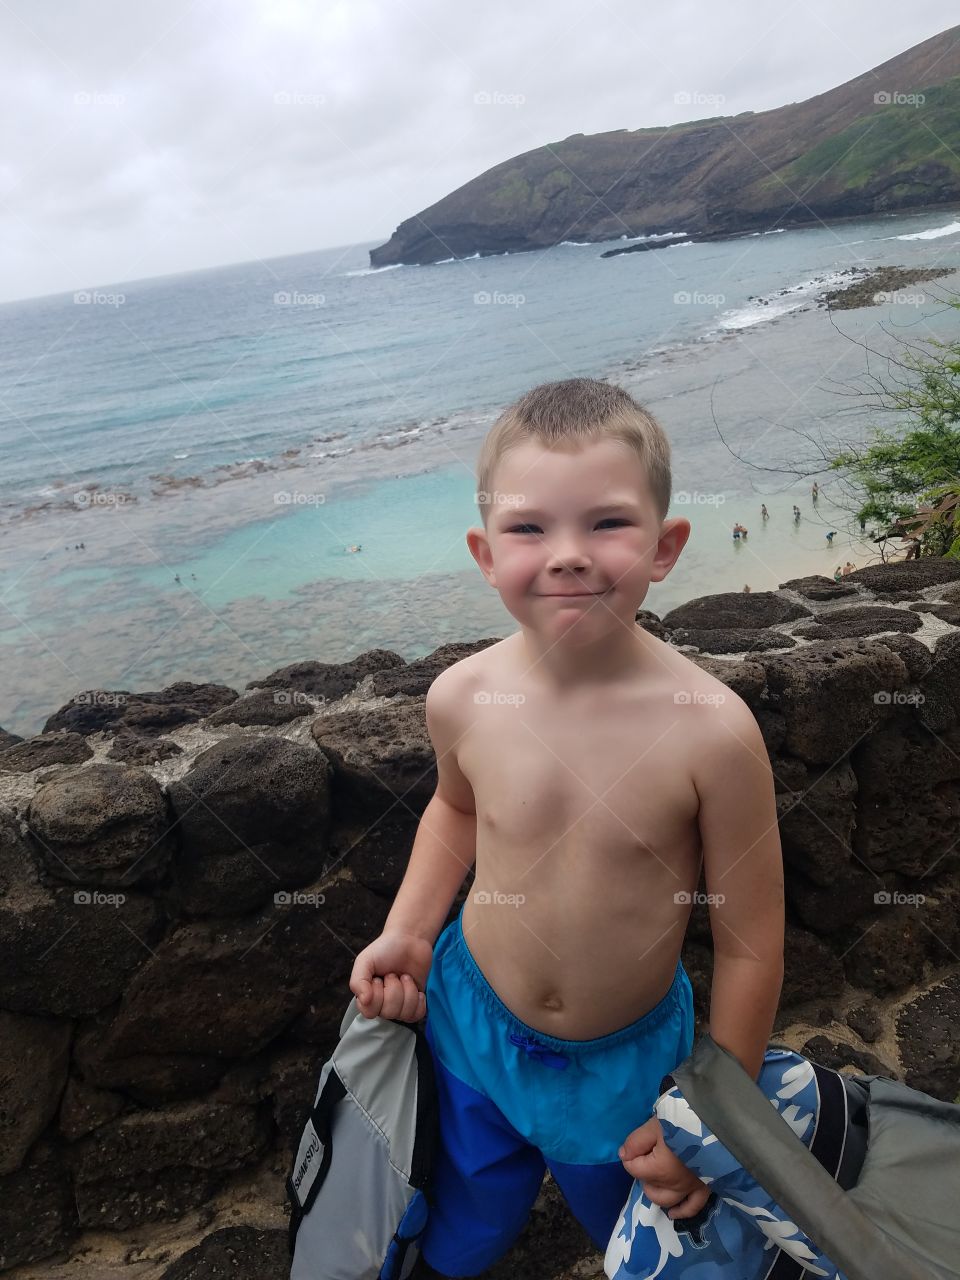 Little boy is all smile before snorkeling at Hanauma Bay.